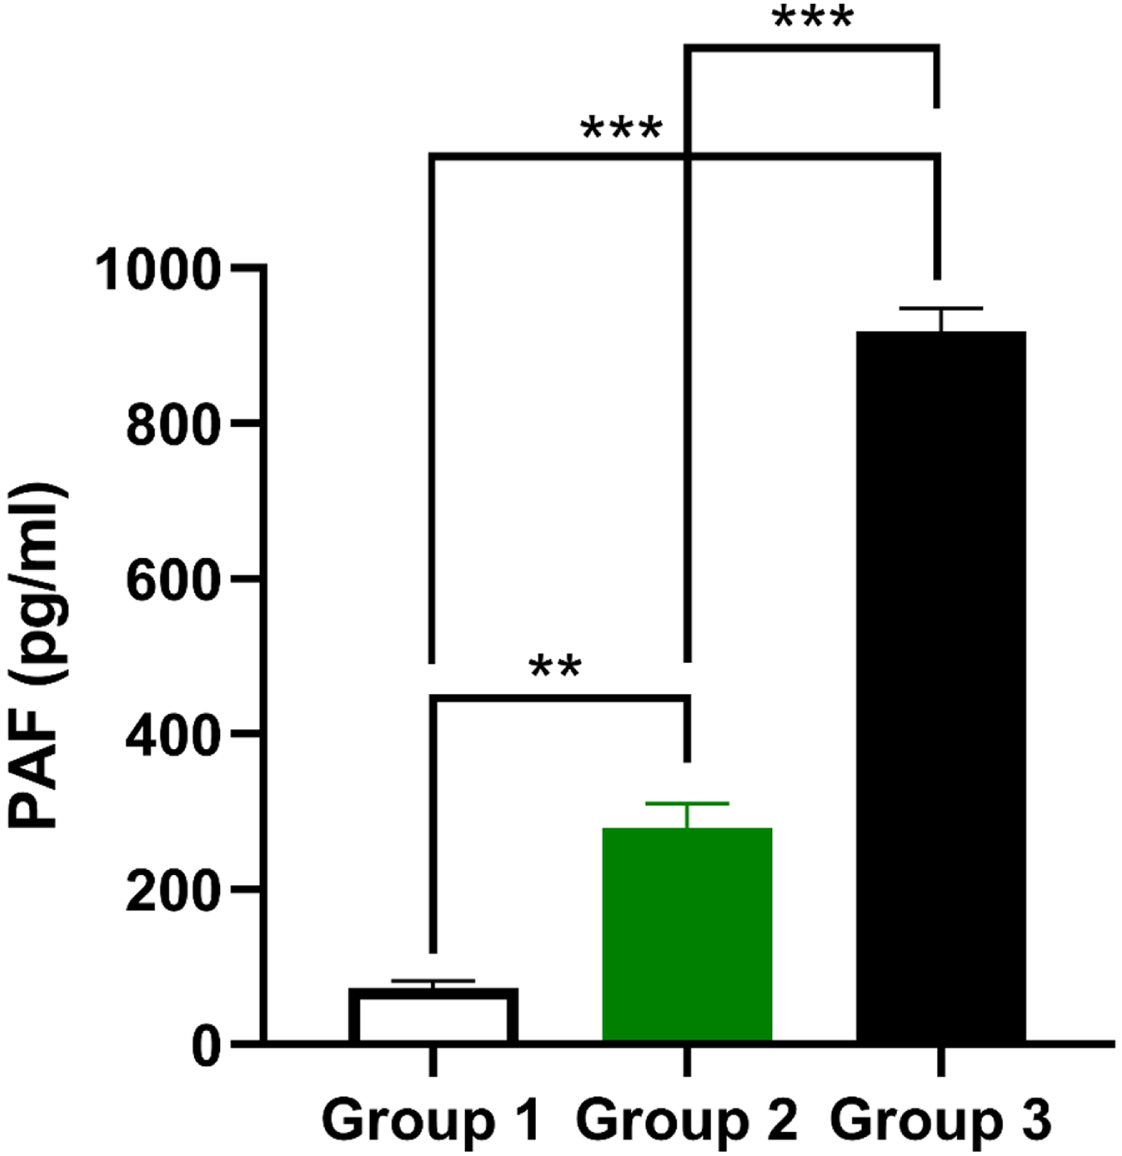 PAF production in three groups of male participants with normal and abnormal levels of PAF. They were calculated referring to the blood serum taken from non-smoking participants (green lines) and smoking participants (black lines) diagnosed with BC. Vlues were presented as means±SEM (n = 30) of three trials. ***P<0.001, **P<0.01, *P<0.05 comparing to the values of the control Group 1.